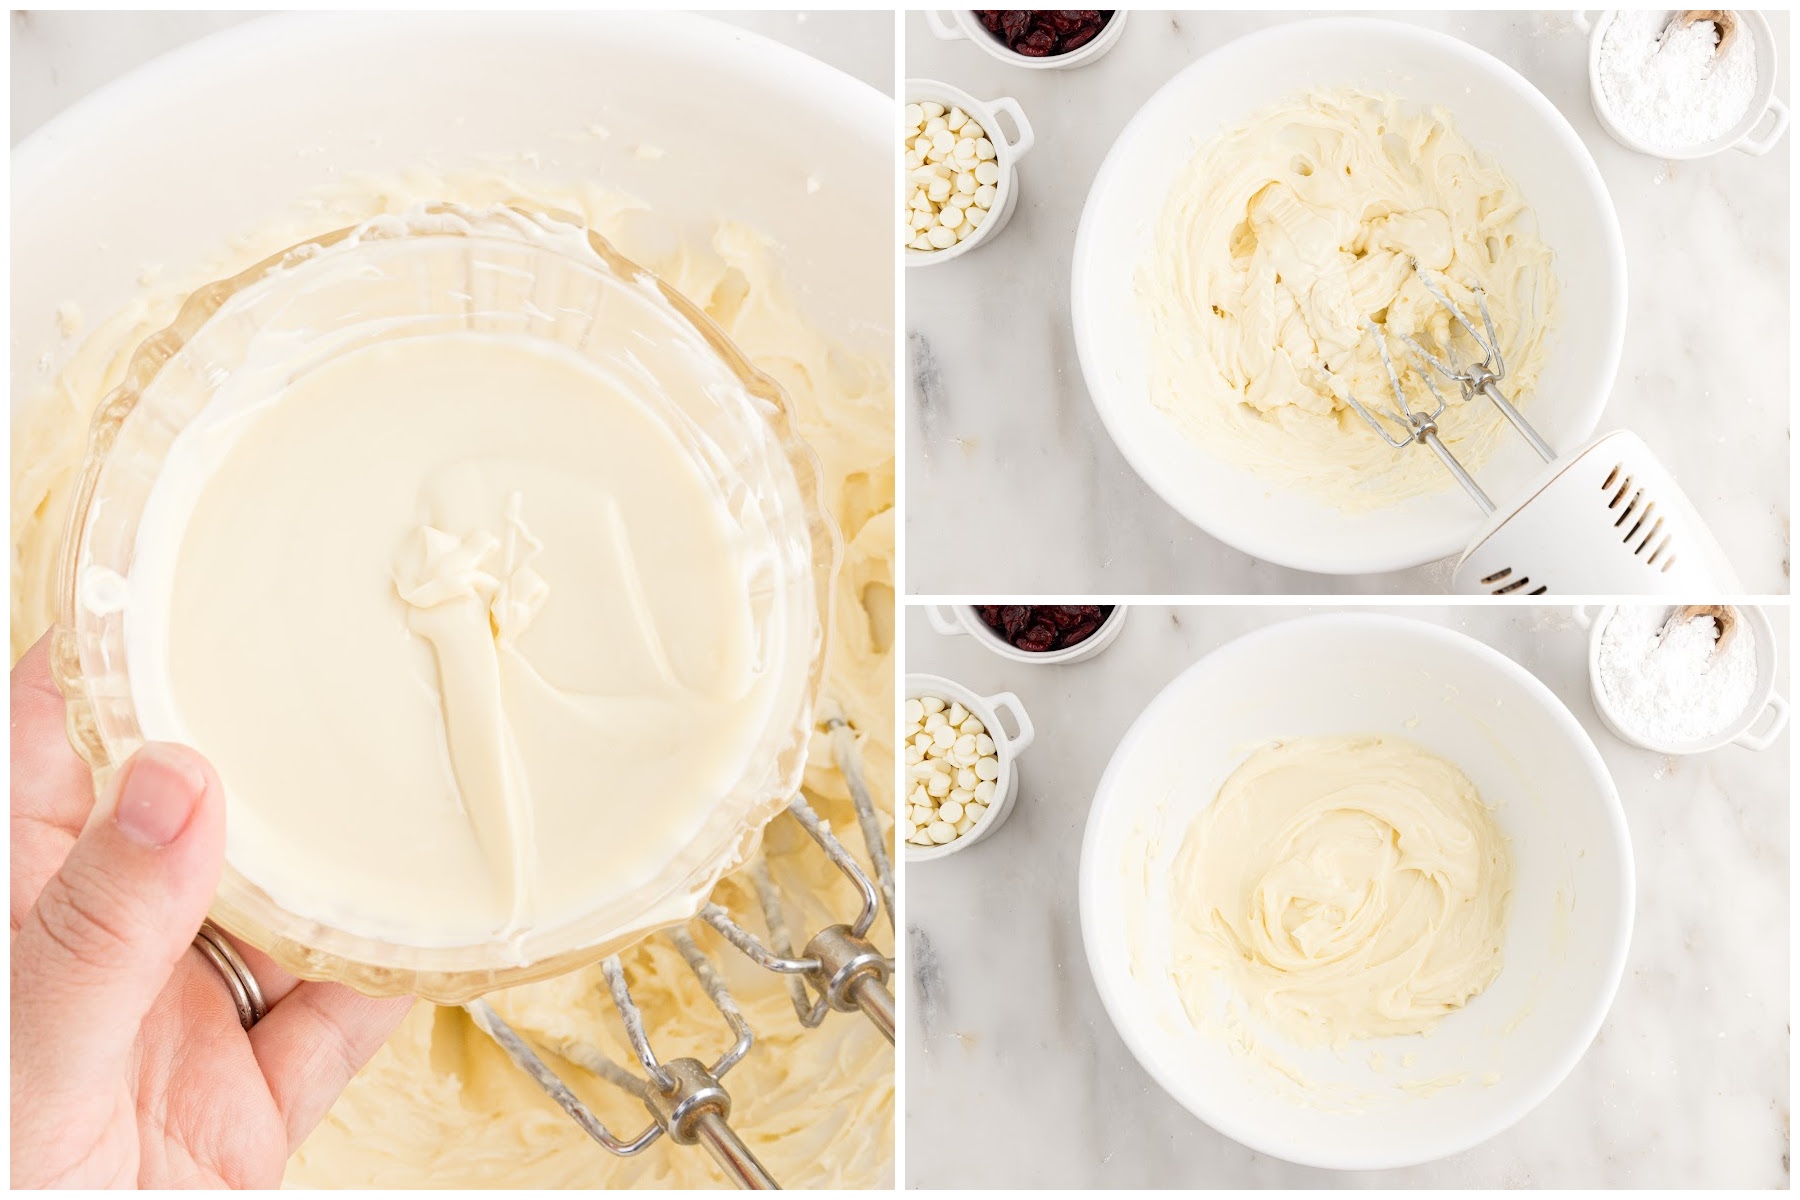 Three images of melted white chocolate and white chocolate added to the icing and icing mixed together in a mixing bowl.